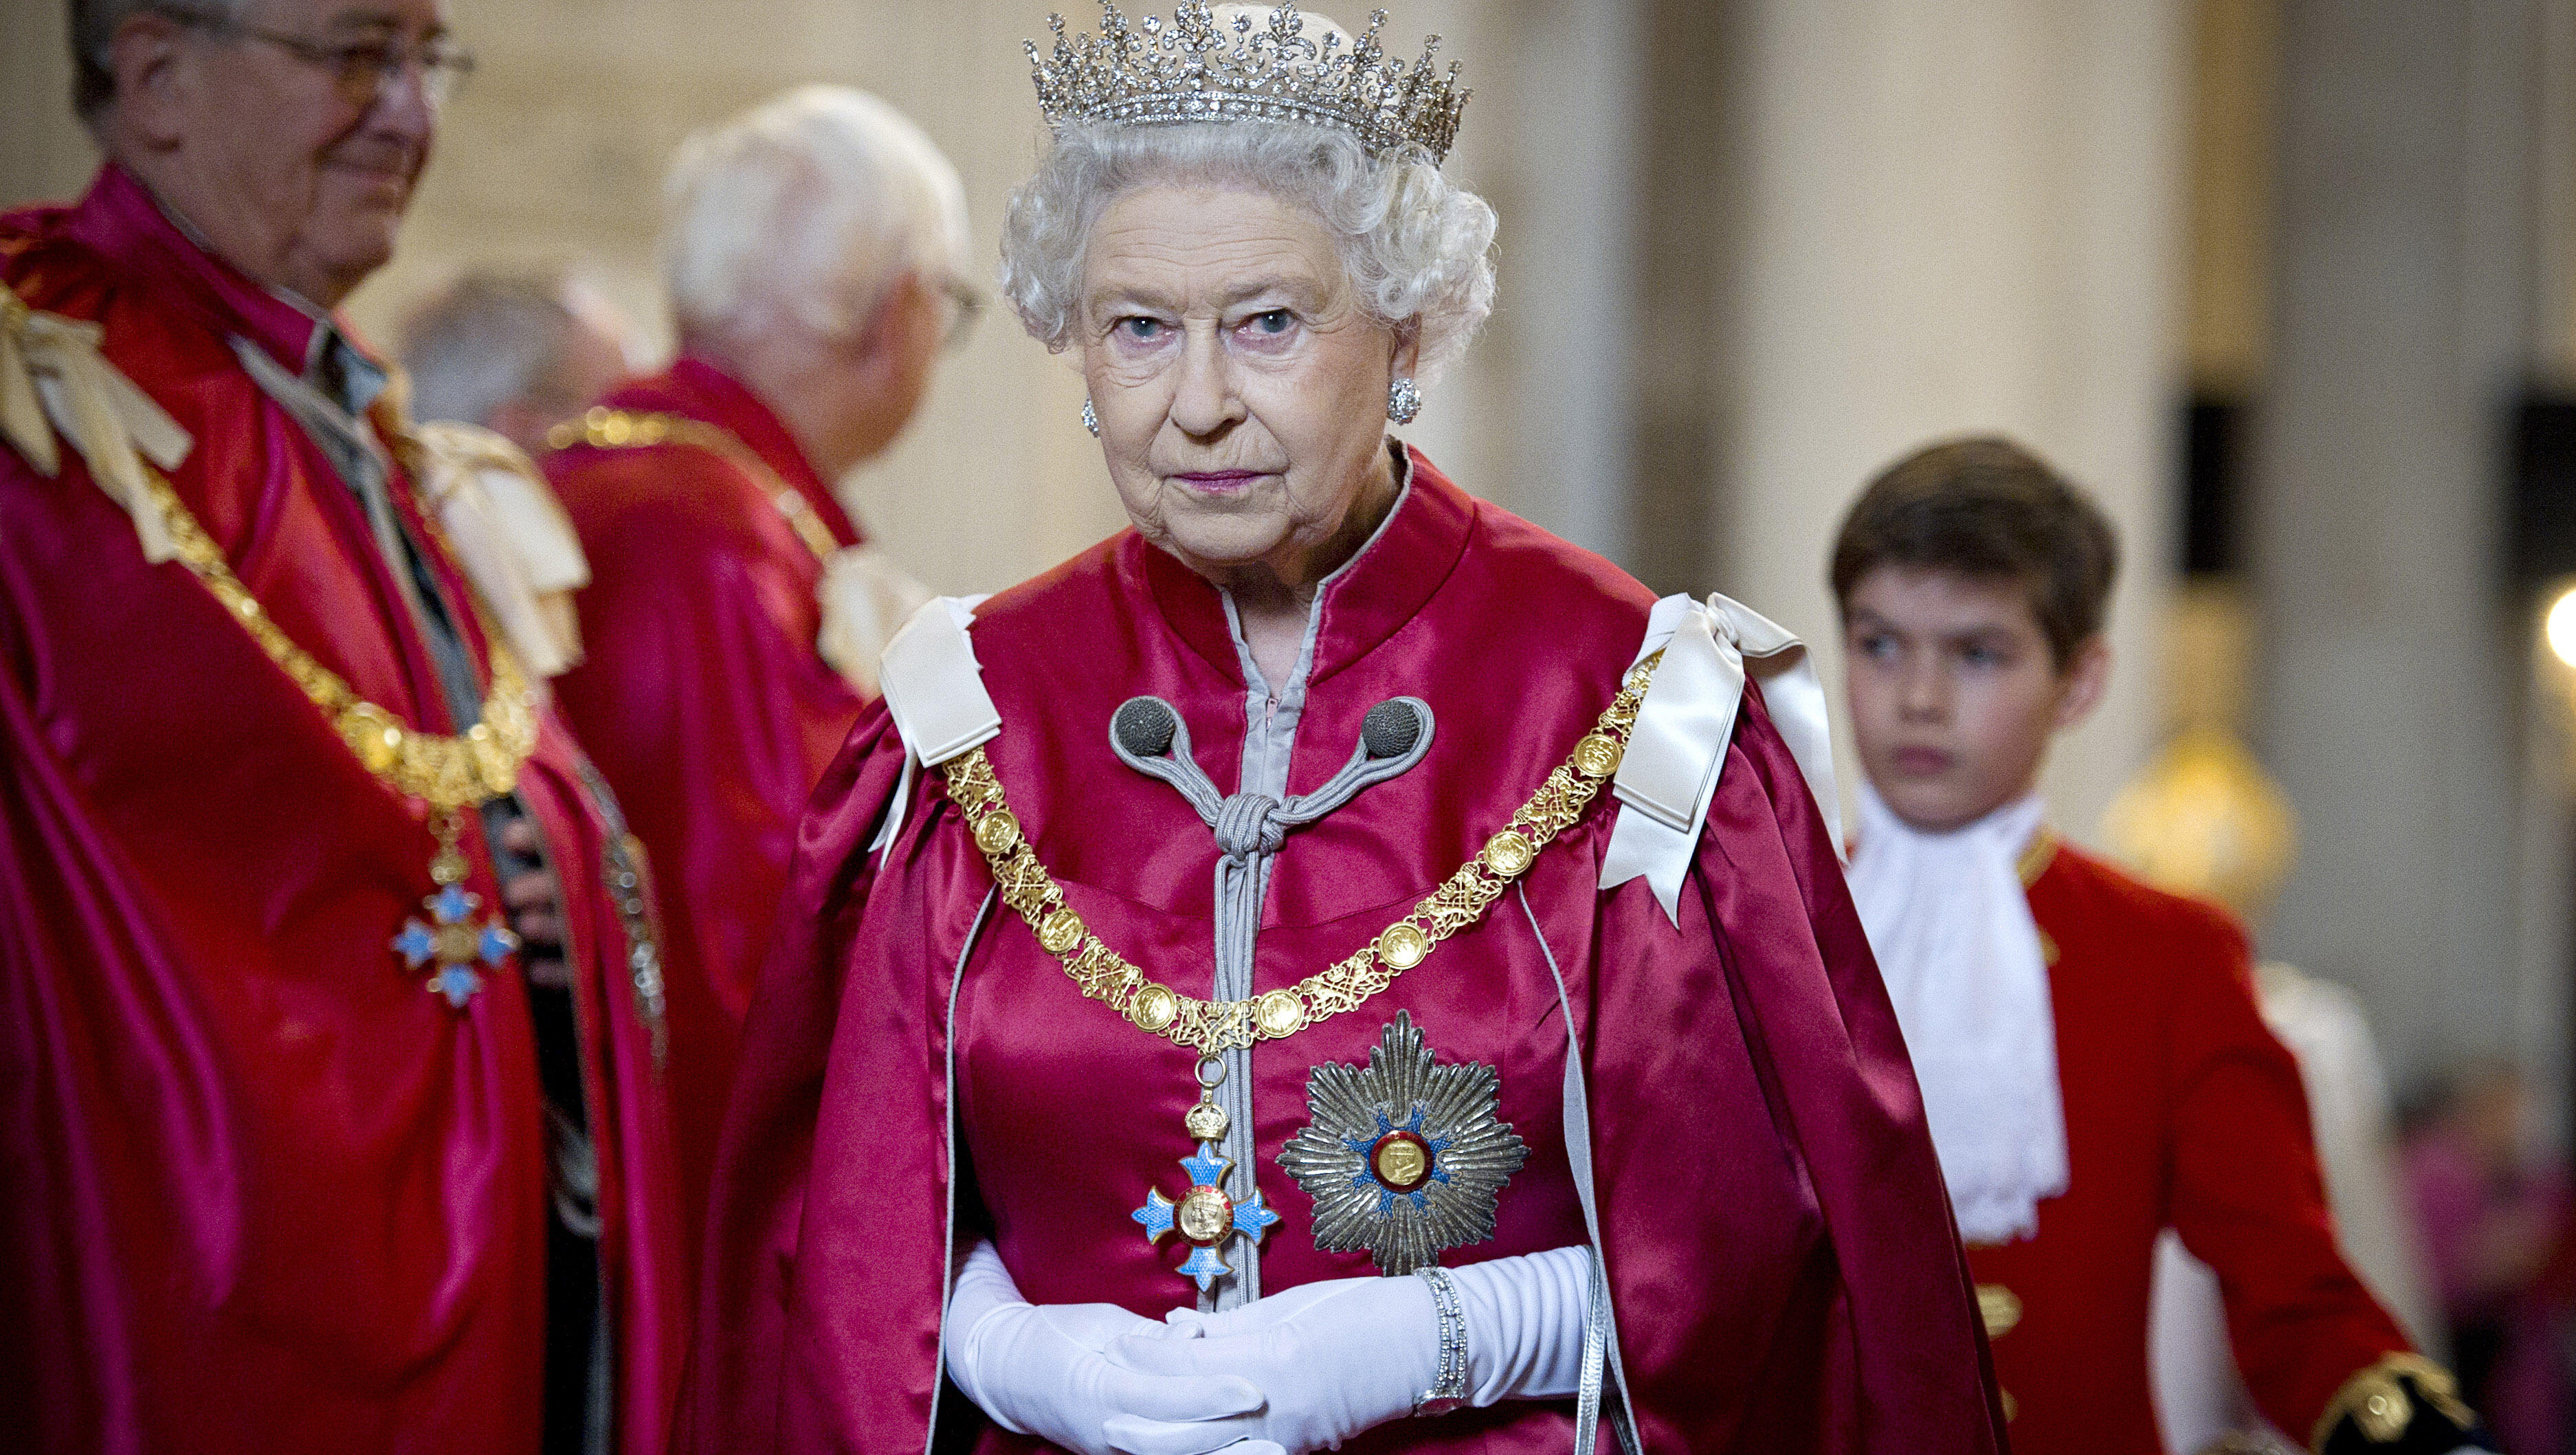 The Queen Of England Has Died